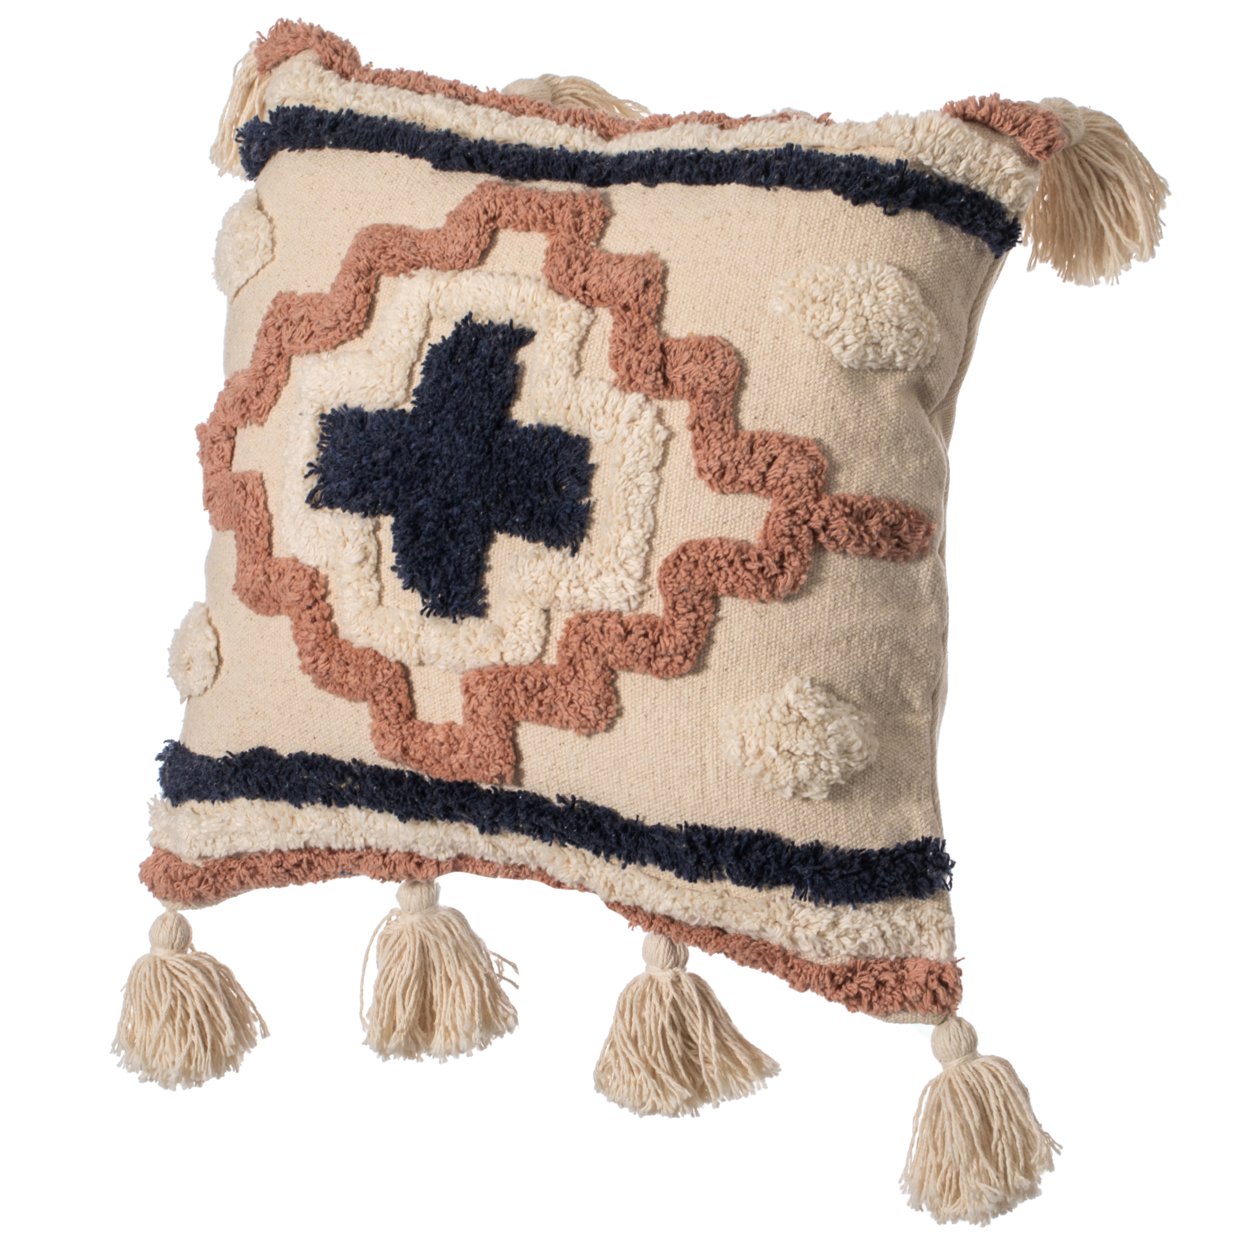 16 Handwoven Cotton Throw Pillow Cover With Tufted Designs And Side Tassels - Circle